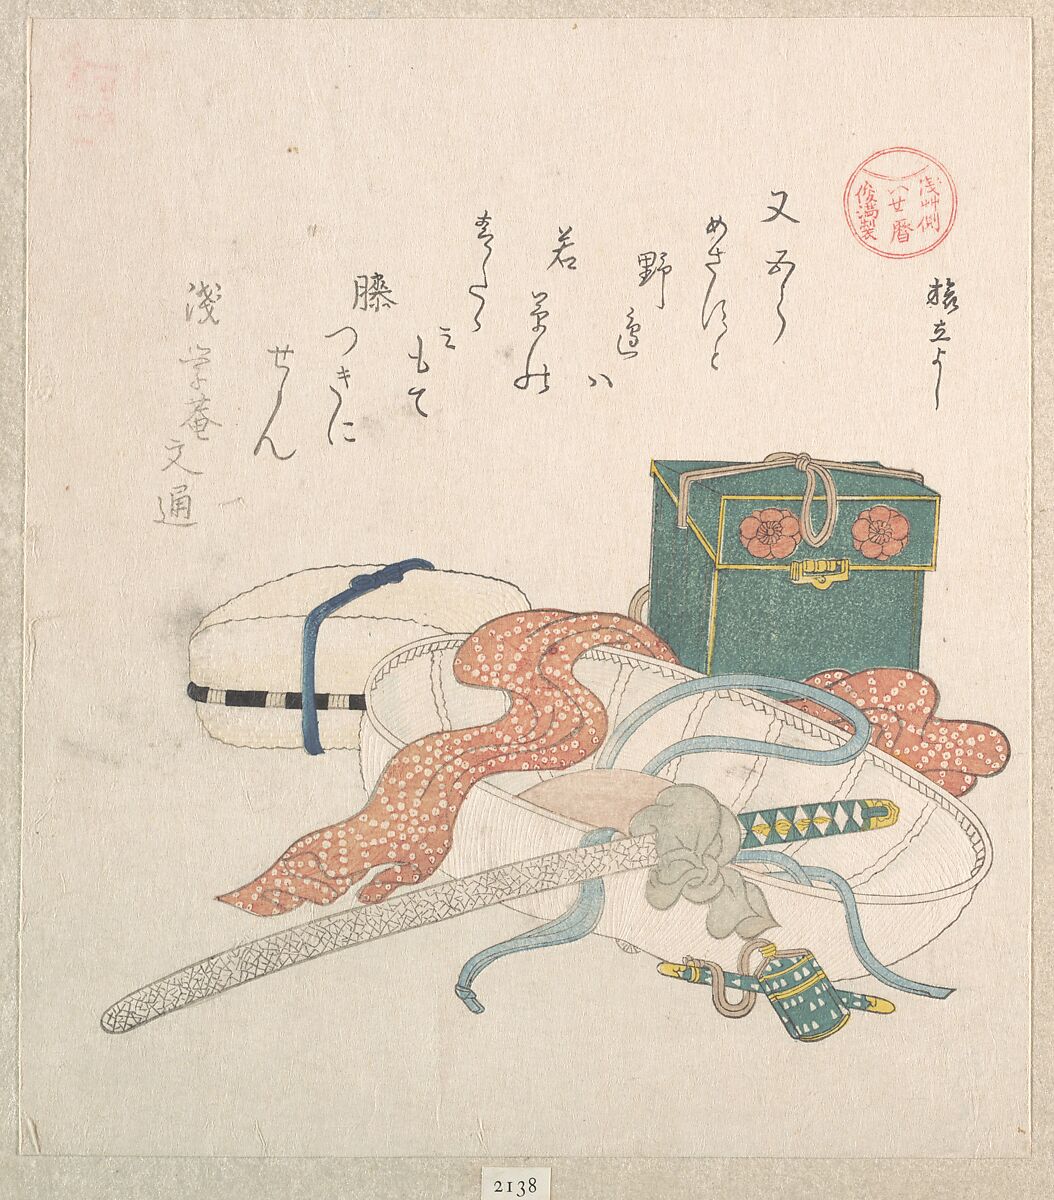 Outfit for Travel, Kubo Shunman (Japanese, 1757–1820) (?), Woodblock print (surimono); ink and color on paper, Japan 